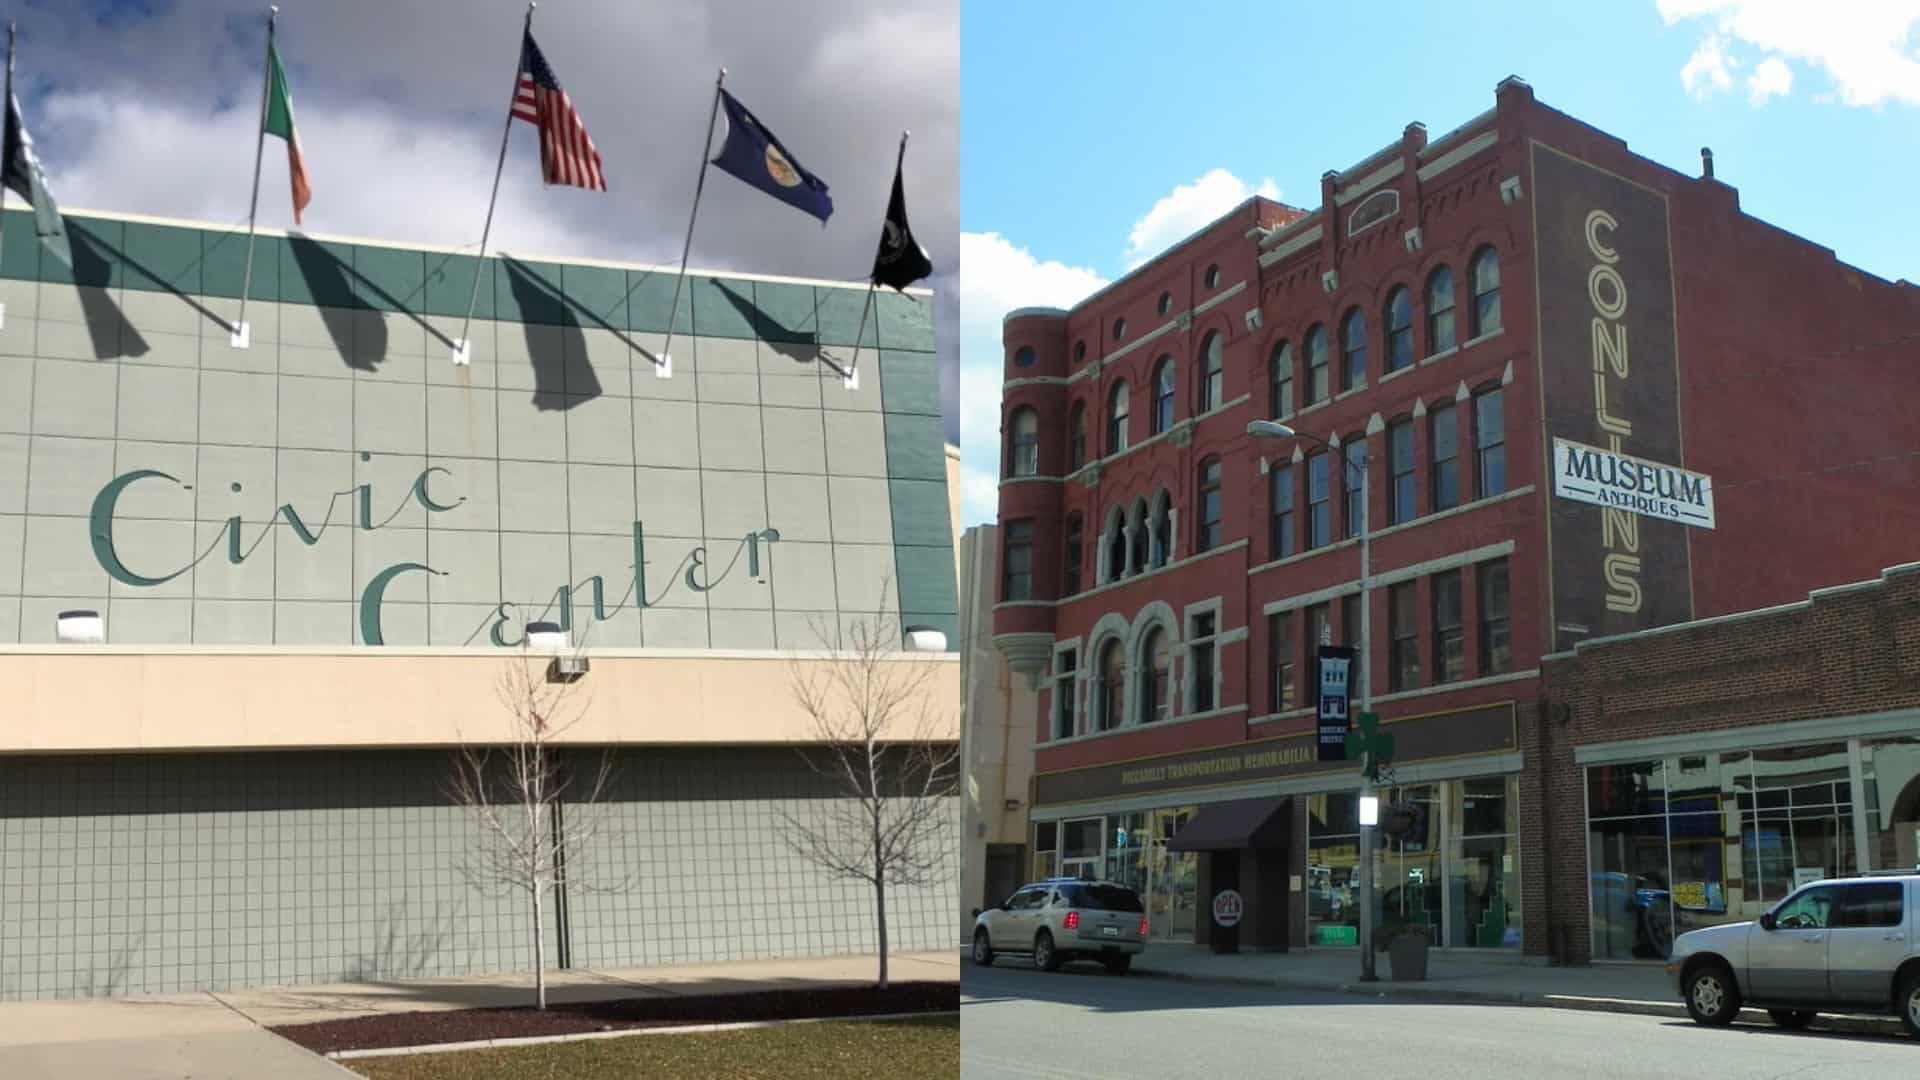 1923 Filming Locations in Butte, Montana